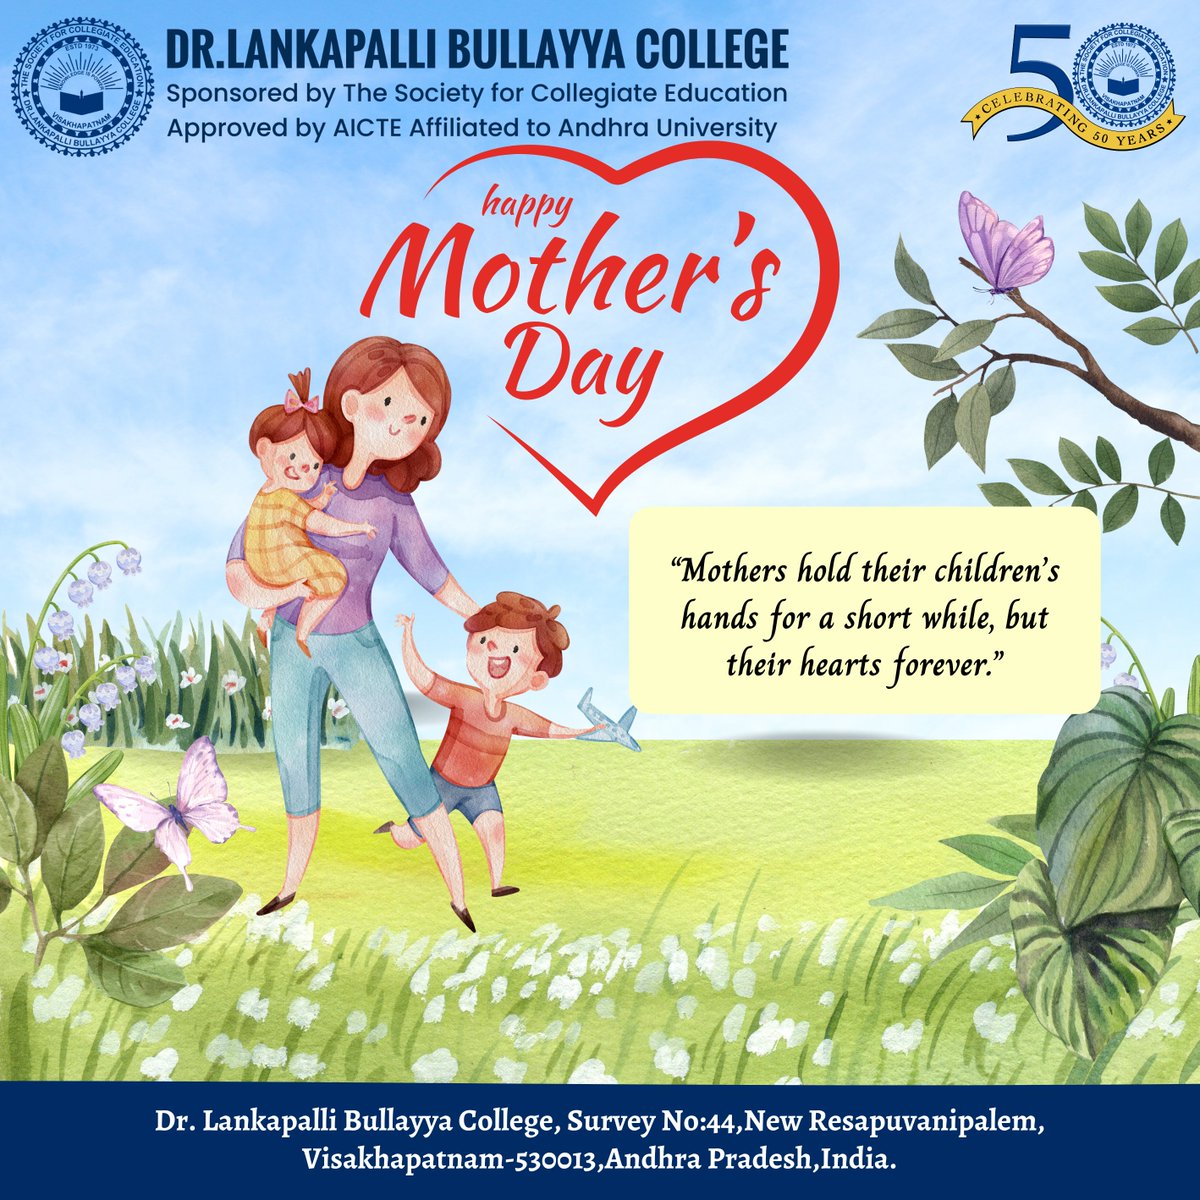 Wishing all the amazing mothers a very Happy Mother's Day. ❤️

#MothersDay2024 #MothersDay #DrLBCollege #Vizag #Visakhapatnam #DegreeCollege #Intermediate #Engineering